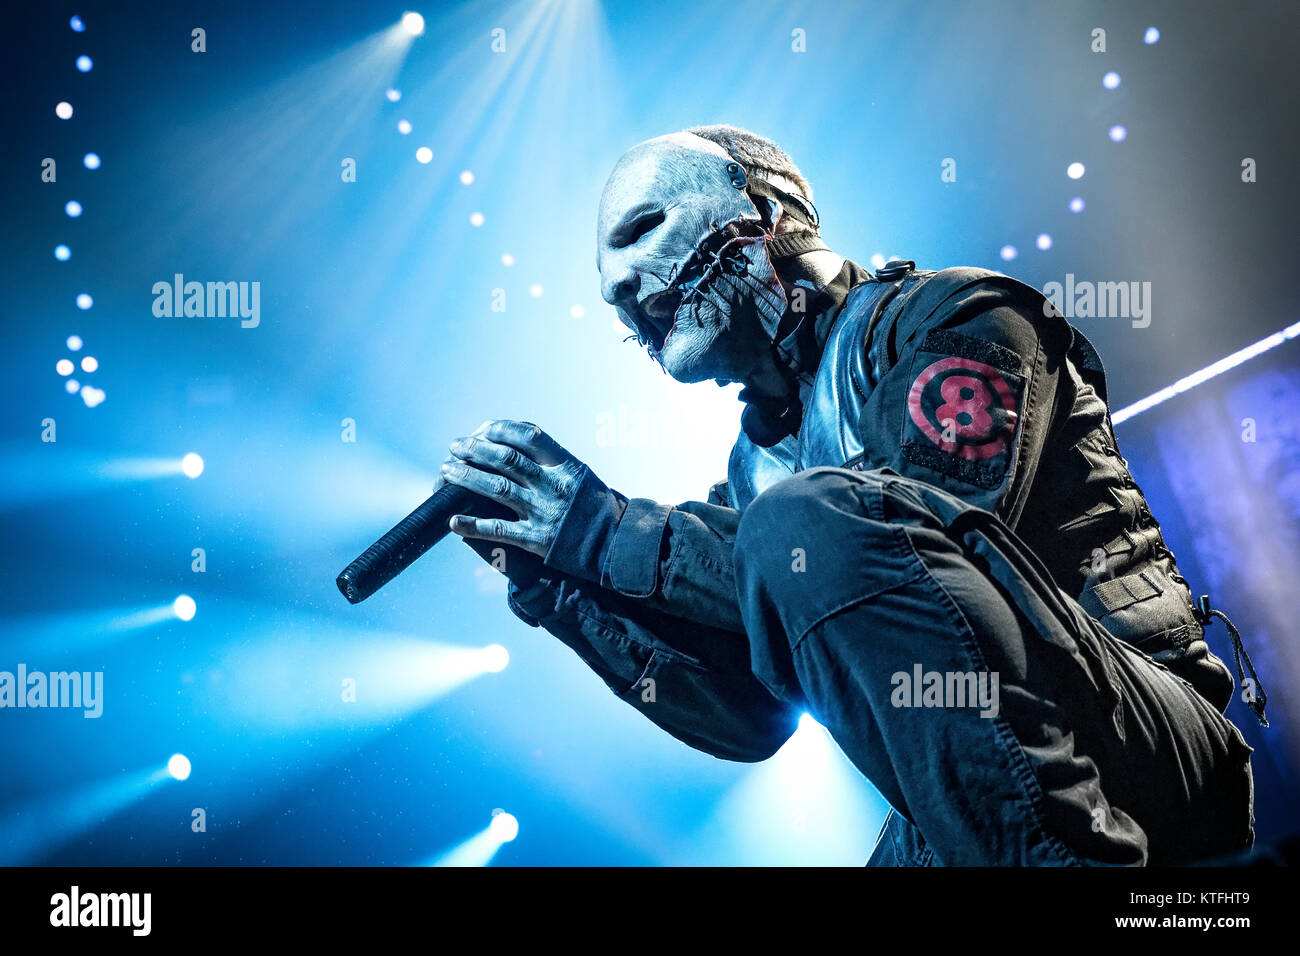 The American heavy metal band Slipknot performs a live concert at Oslo Spektrum. Here the band’s vocalist Corey Taylor is seen live on stage. Norway, 10/02 2015. Stock Photo